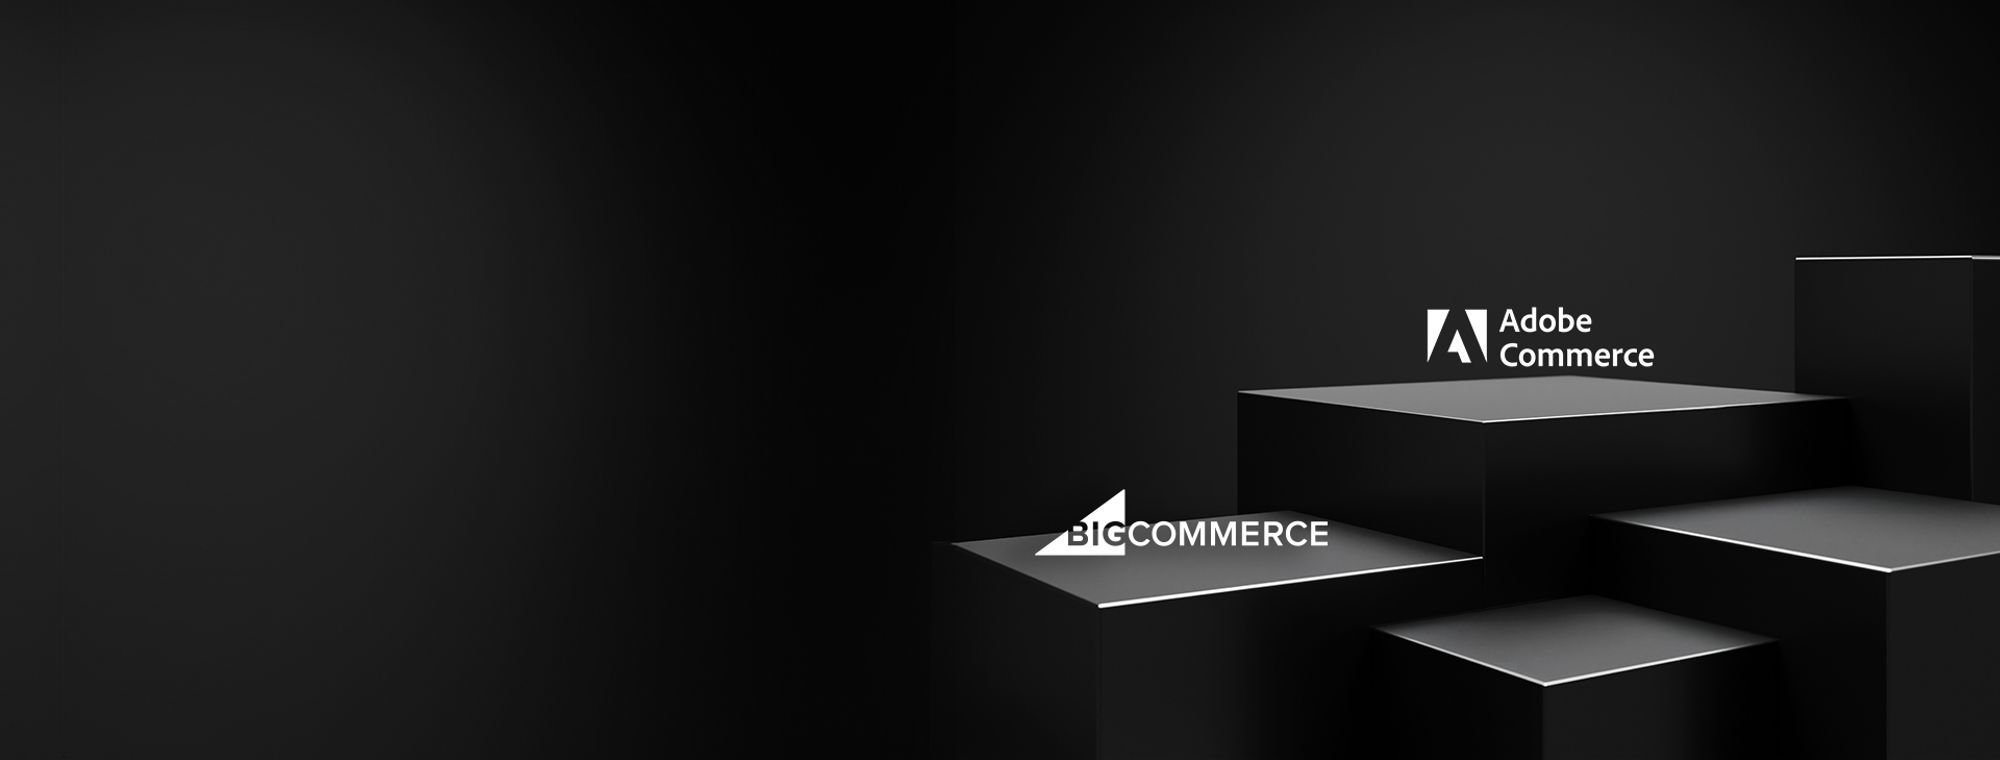 Adobe Commerce logo and BigCommerce logos on pedestal (abstract image)